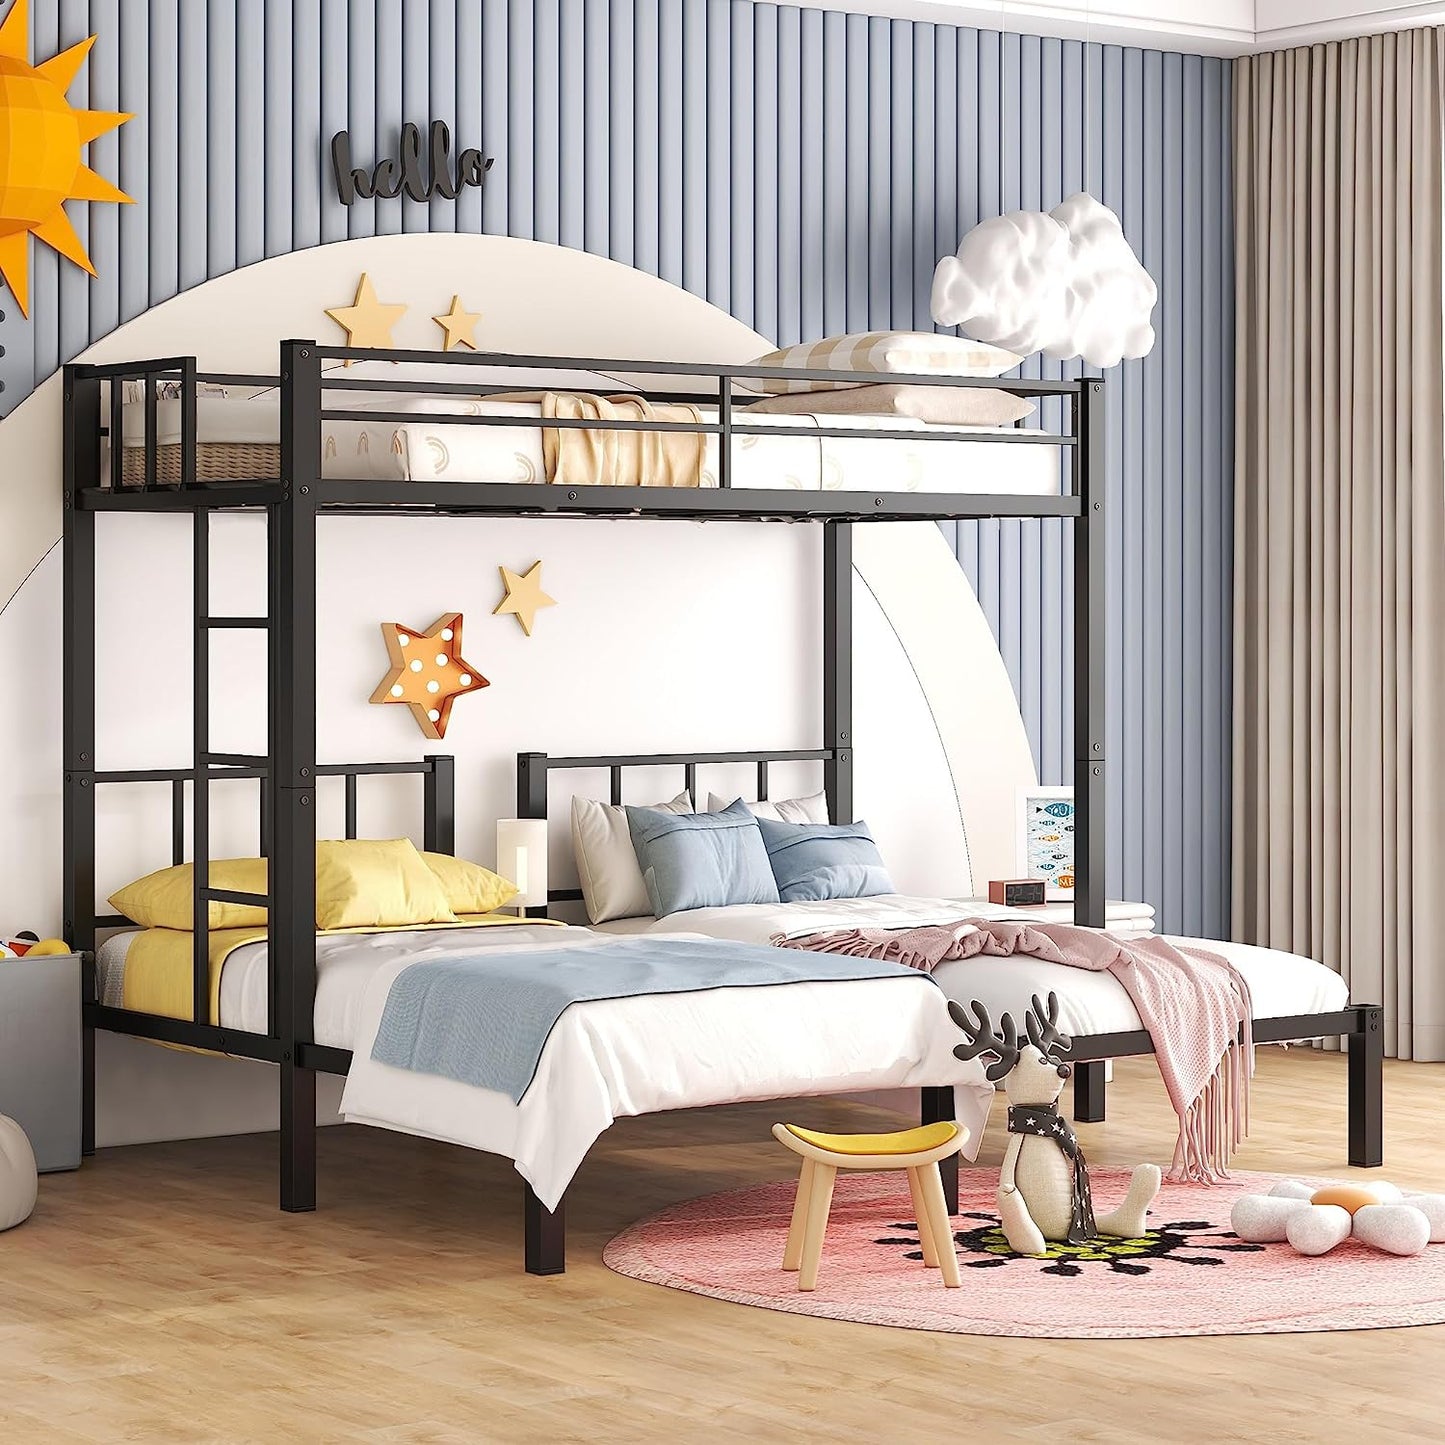 HSUNNS Metal Triple Bunk Bed Twin Over Twin&Twin for Kids, Modern Triple Bunk Bed with Guardrails and Ladder, Separable into 3 Platform Bed with Headboard, Black Twin Bed Frame for Boys Girls